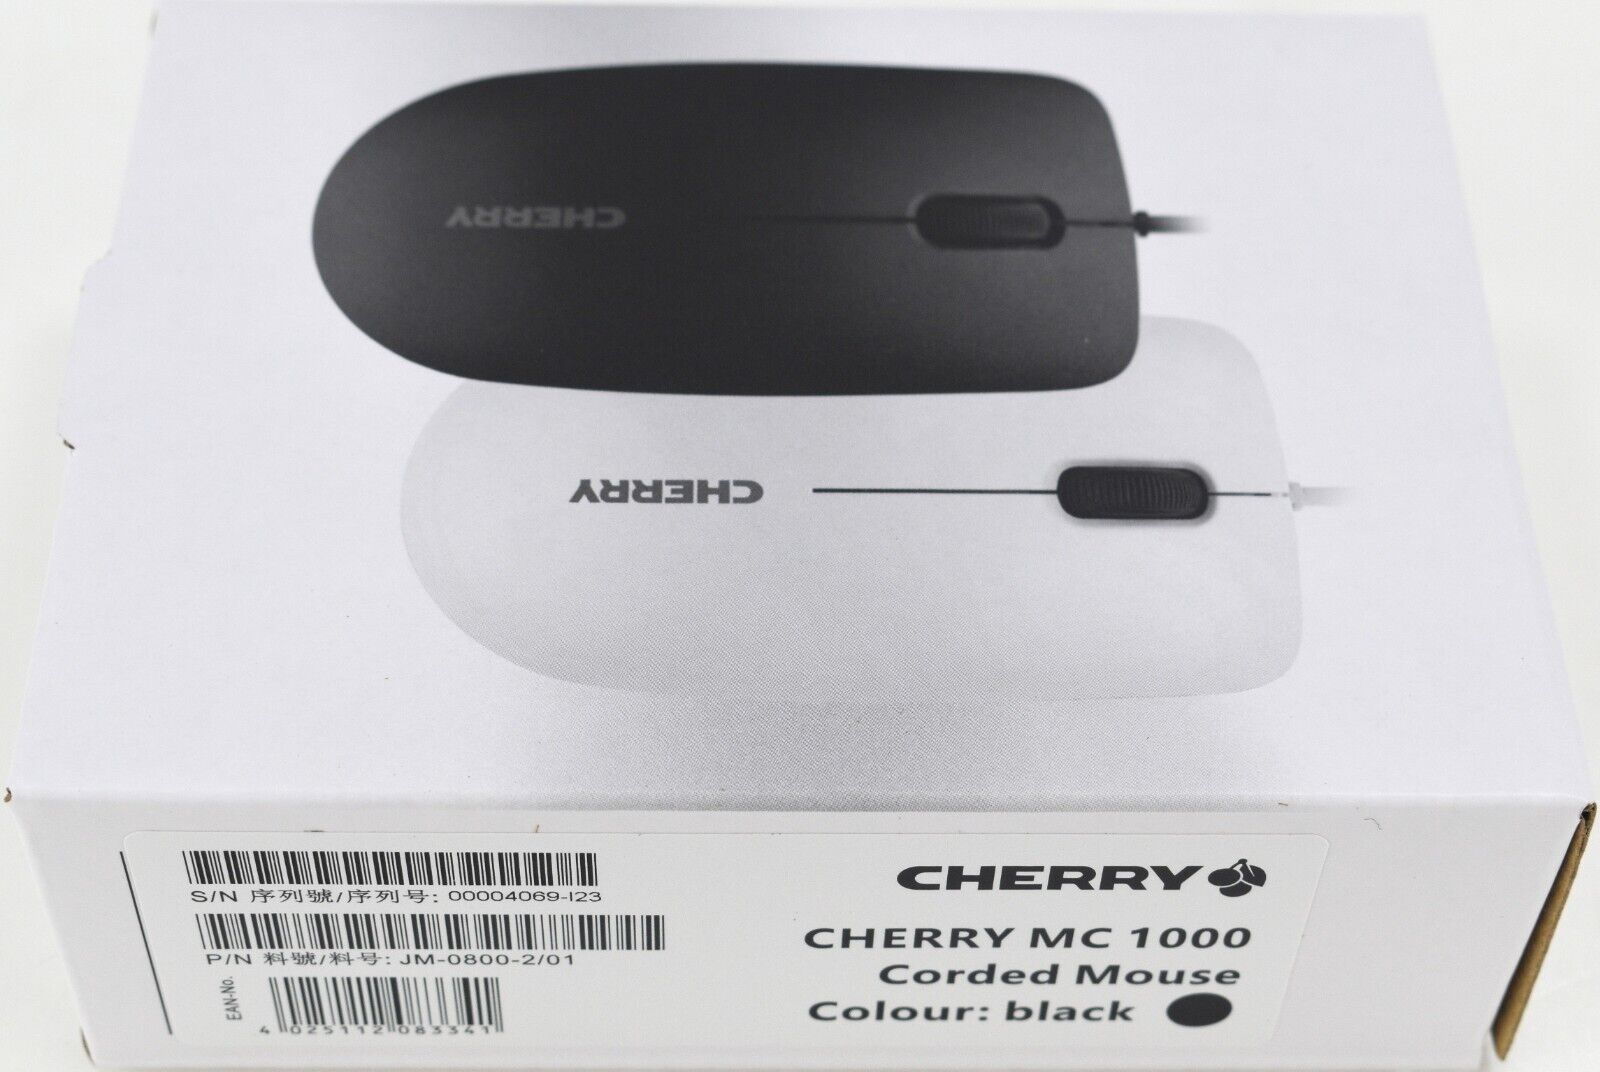 Cherry MC 1000 Wired USB Mouse, 3 Button w/ Scroll Wheel